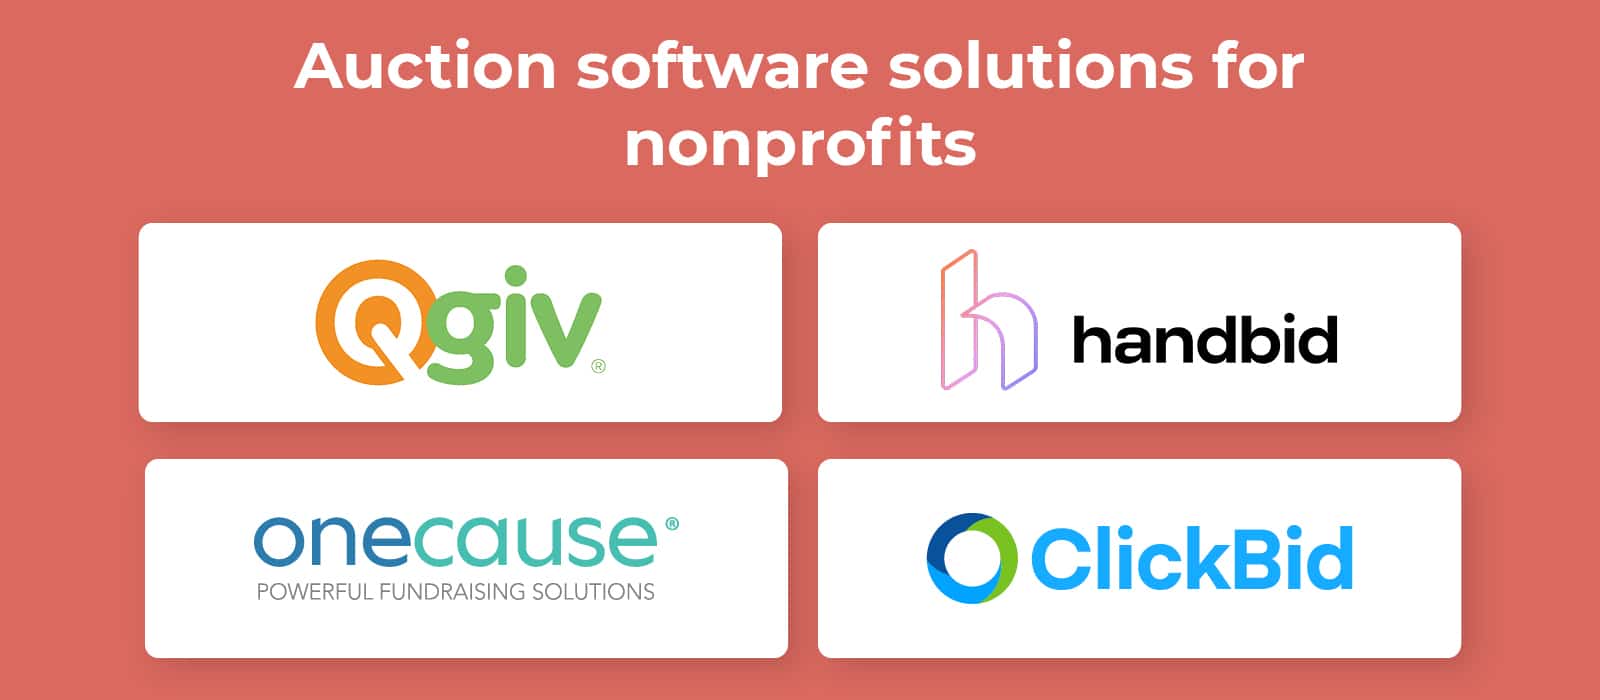 Logos for the auction software options for nonprofits, listed below